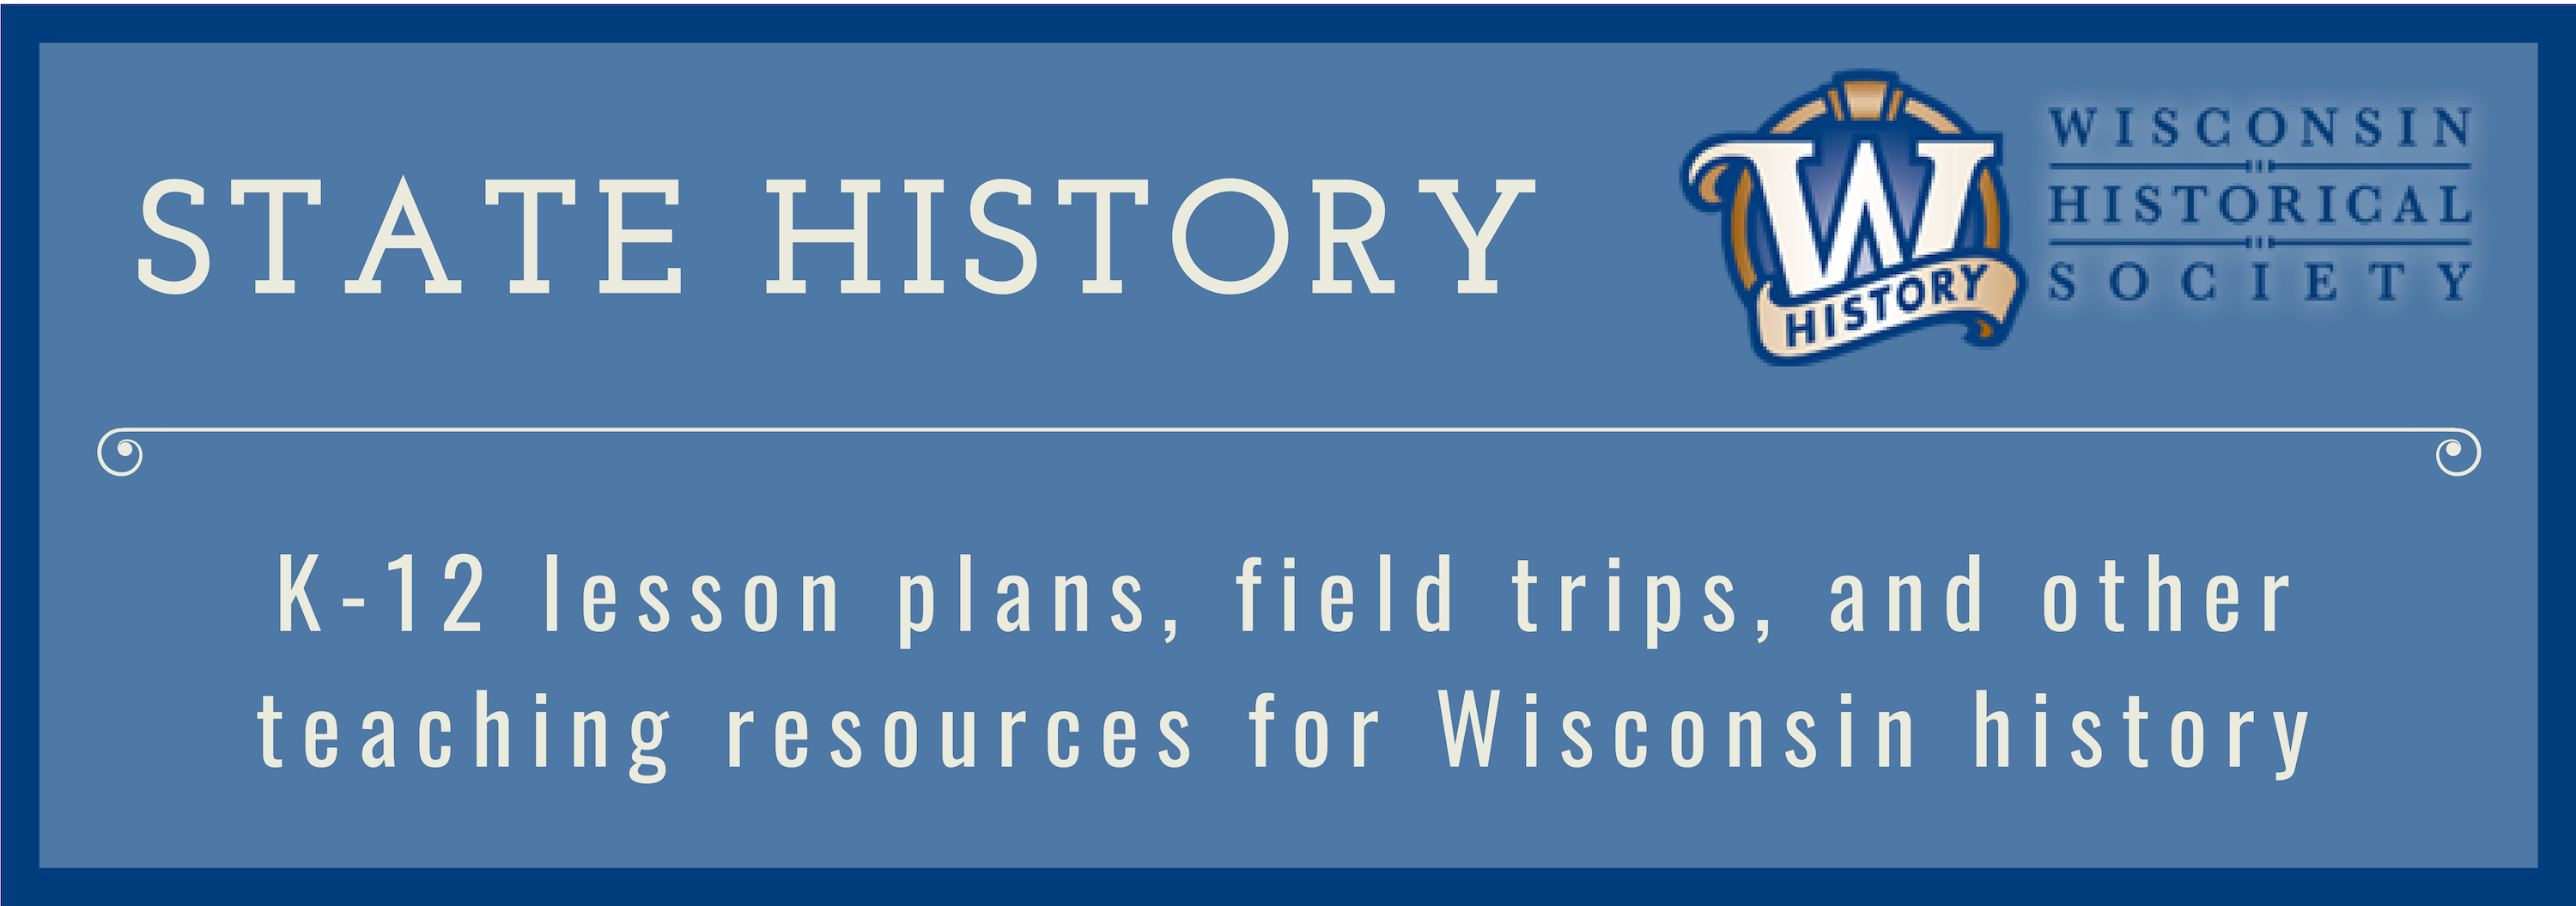 Wisconsin State Historical Society logo and button for lesson plans